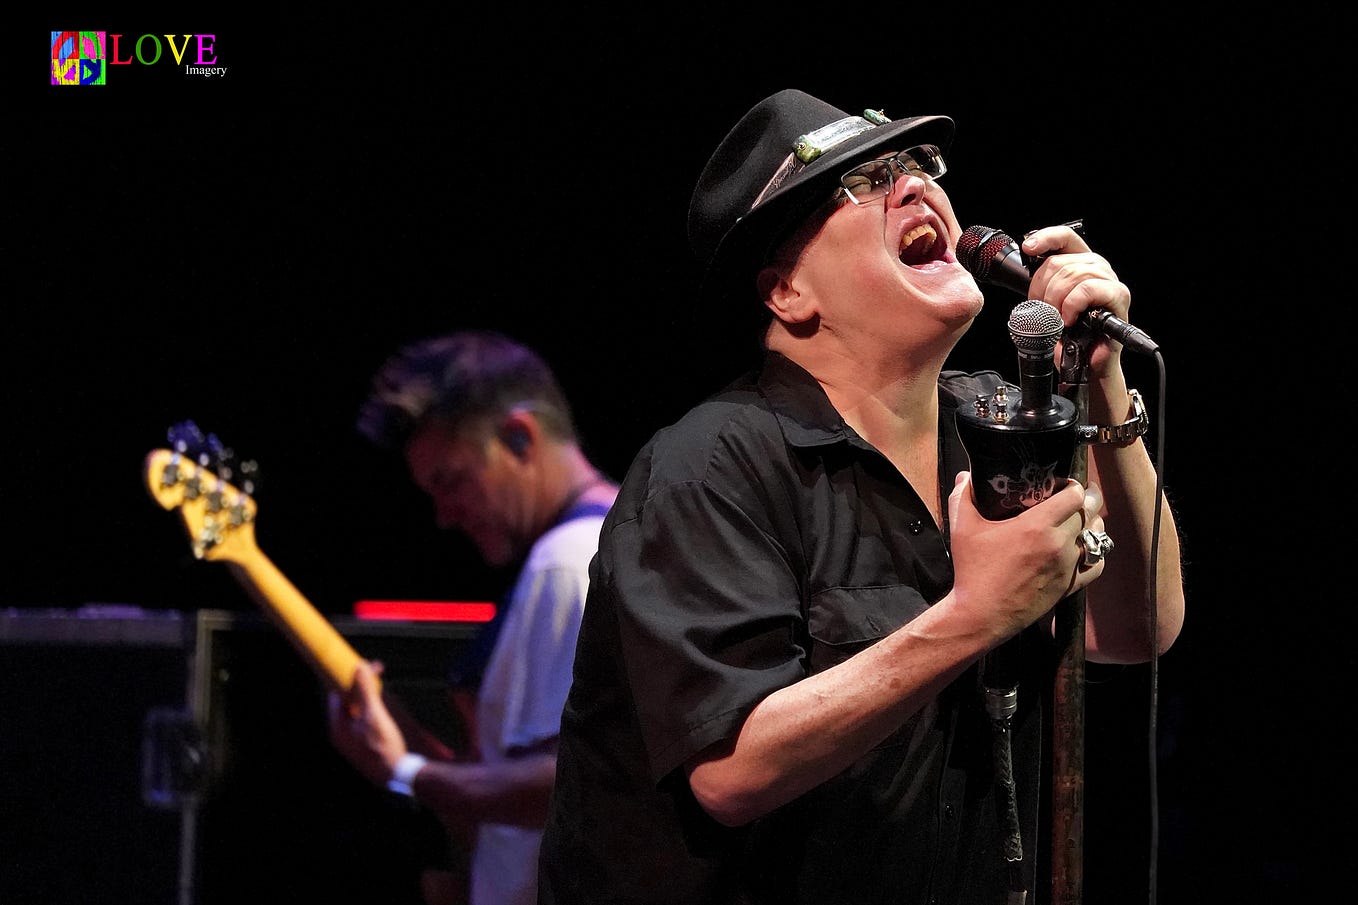 “Great Performers, Great Venue, Great Night!” Blues Traveler LIVE! at the Grunin Center